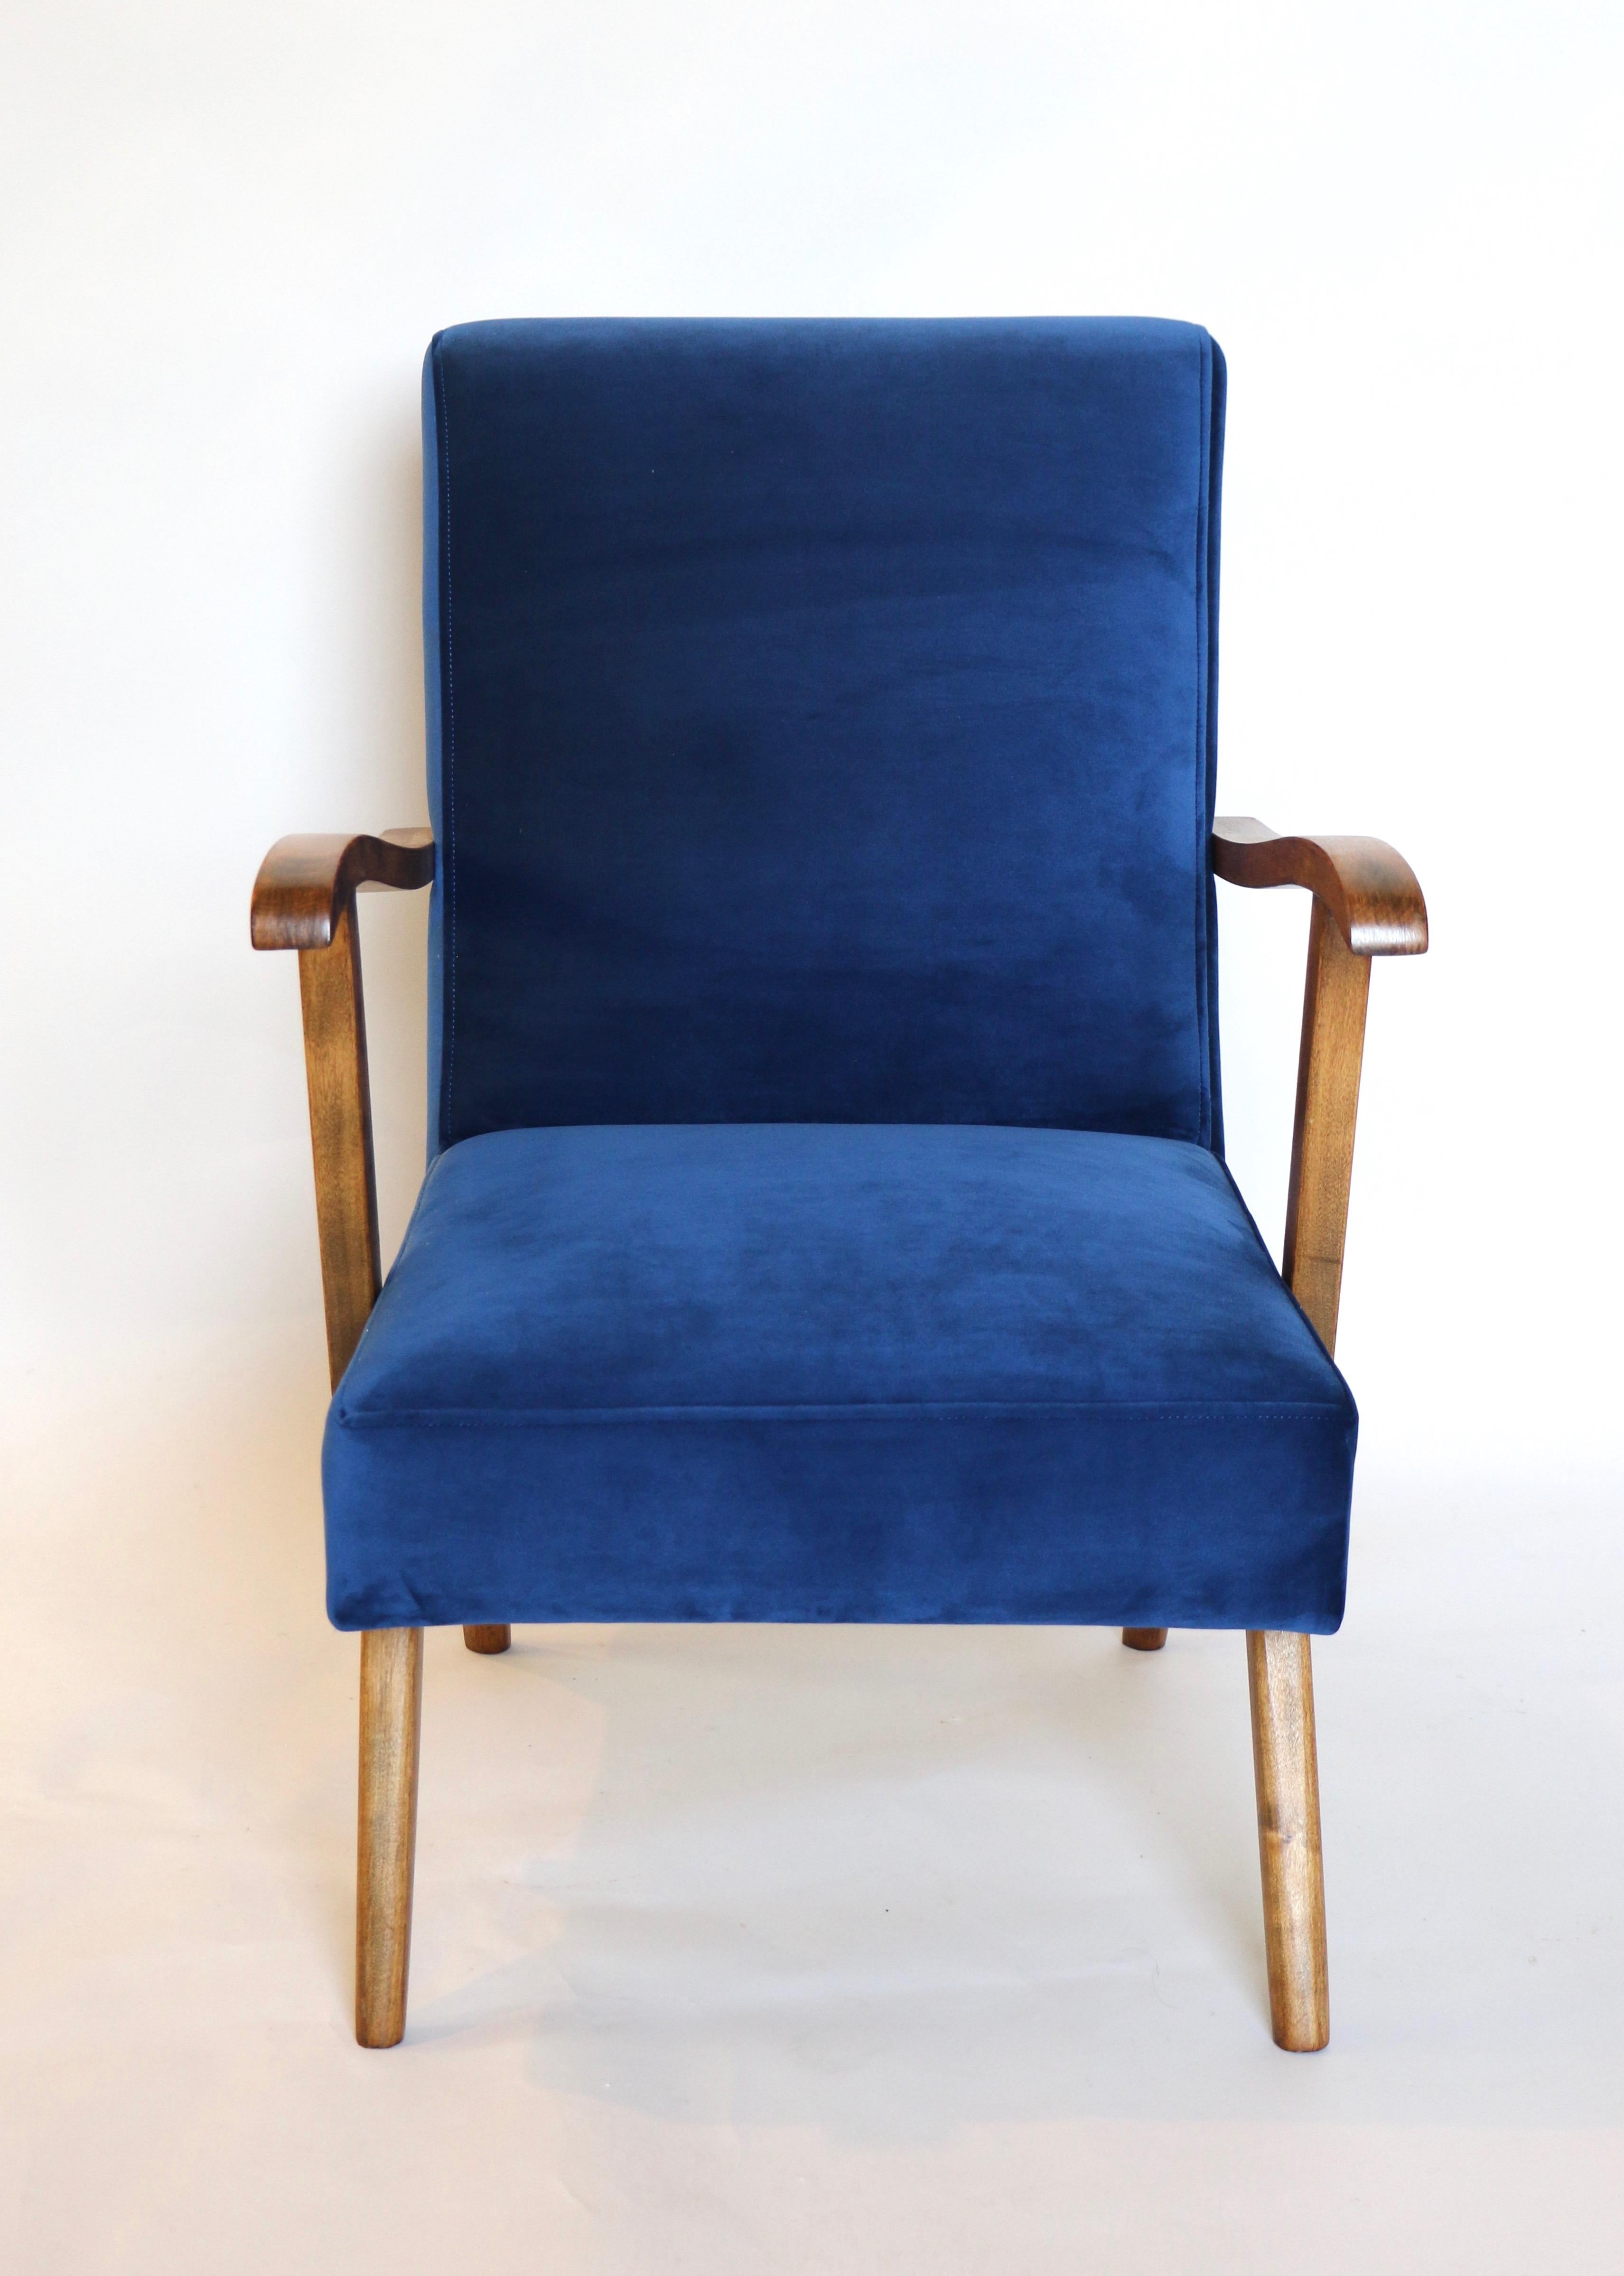 Restored vintage club armchair in blue velvet from 20 century, new upholstery covered with velvet fabric in fashionable blue color, finished with wooden chair cushion. Wooden elements in natural wood color. Very good condition.

Measures: H 83 x W